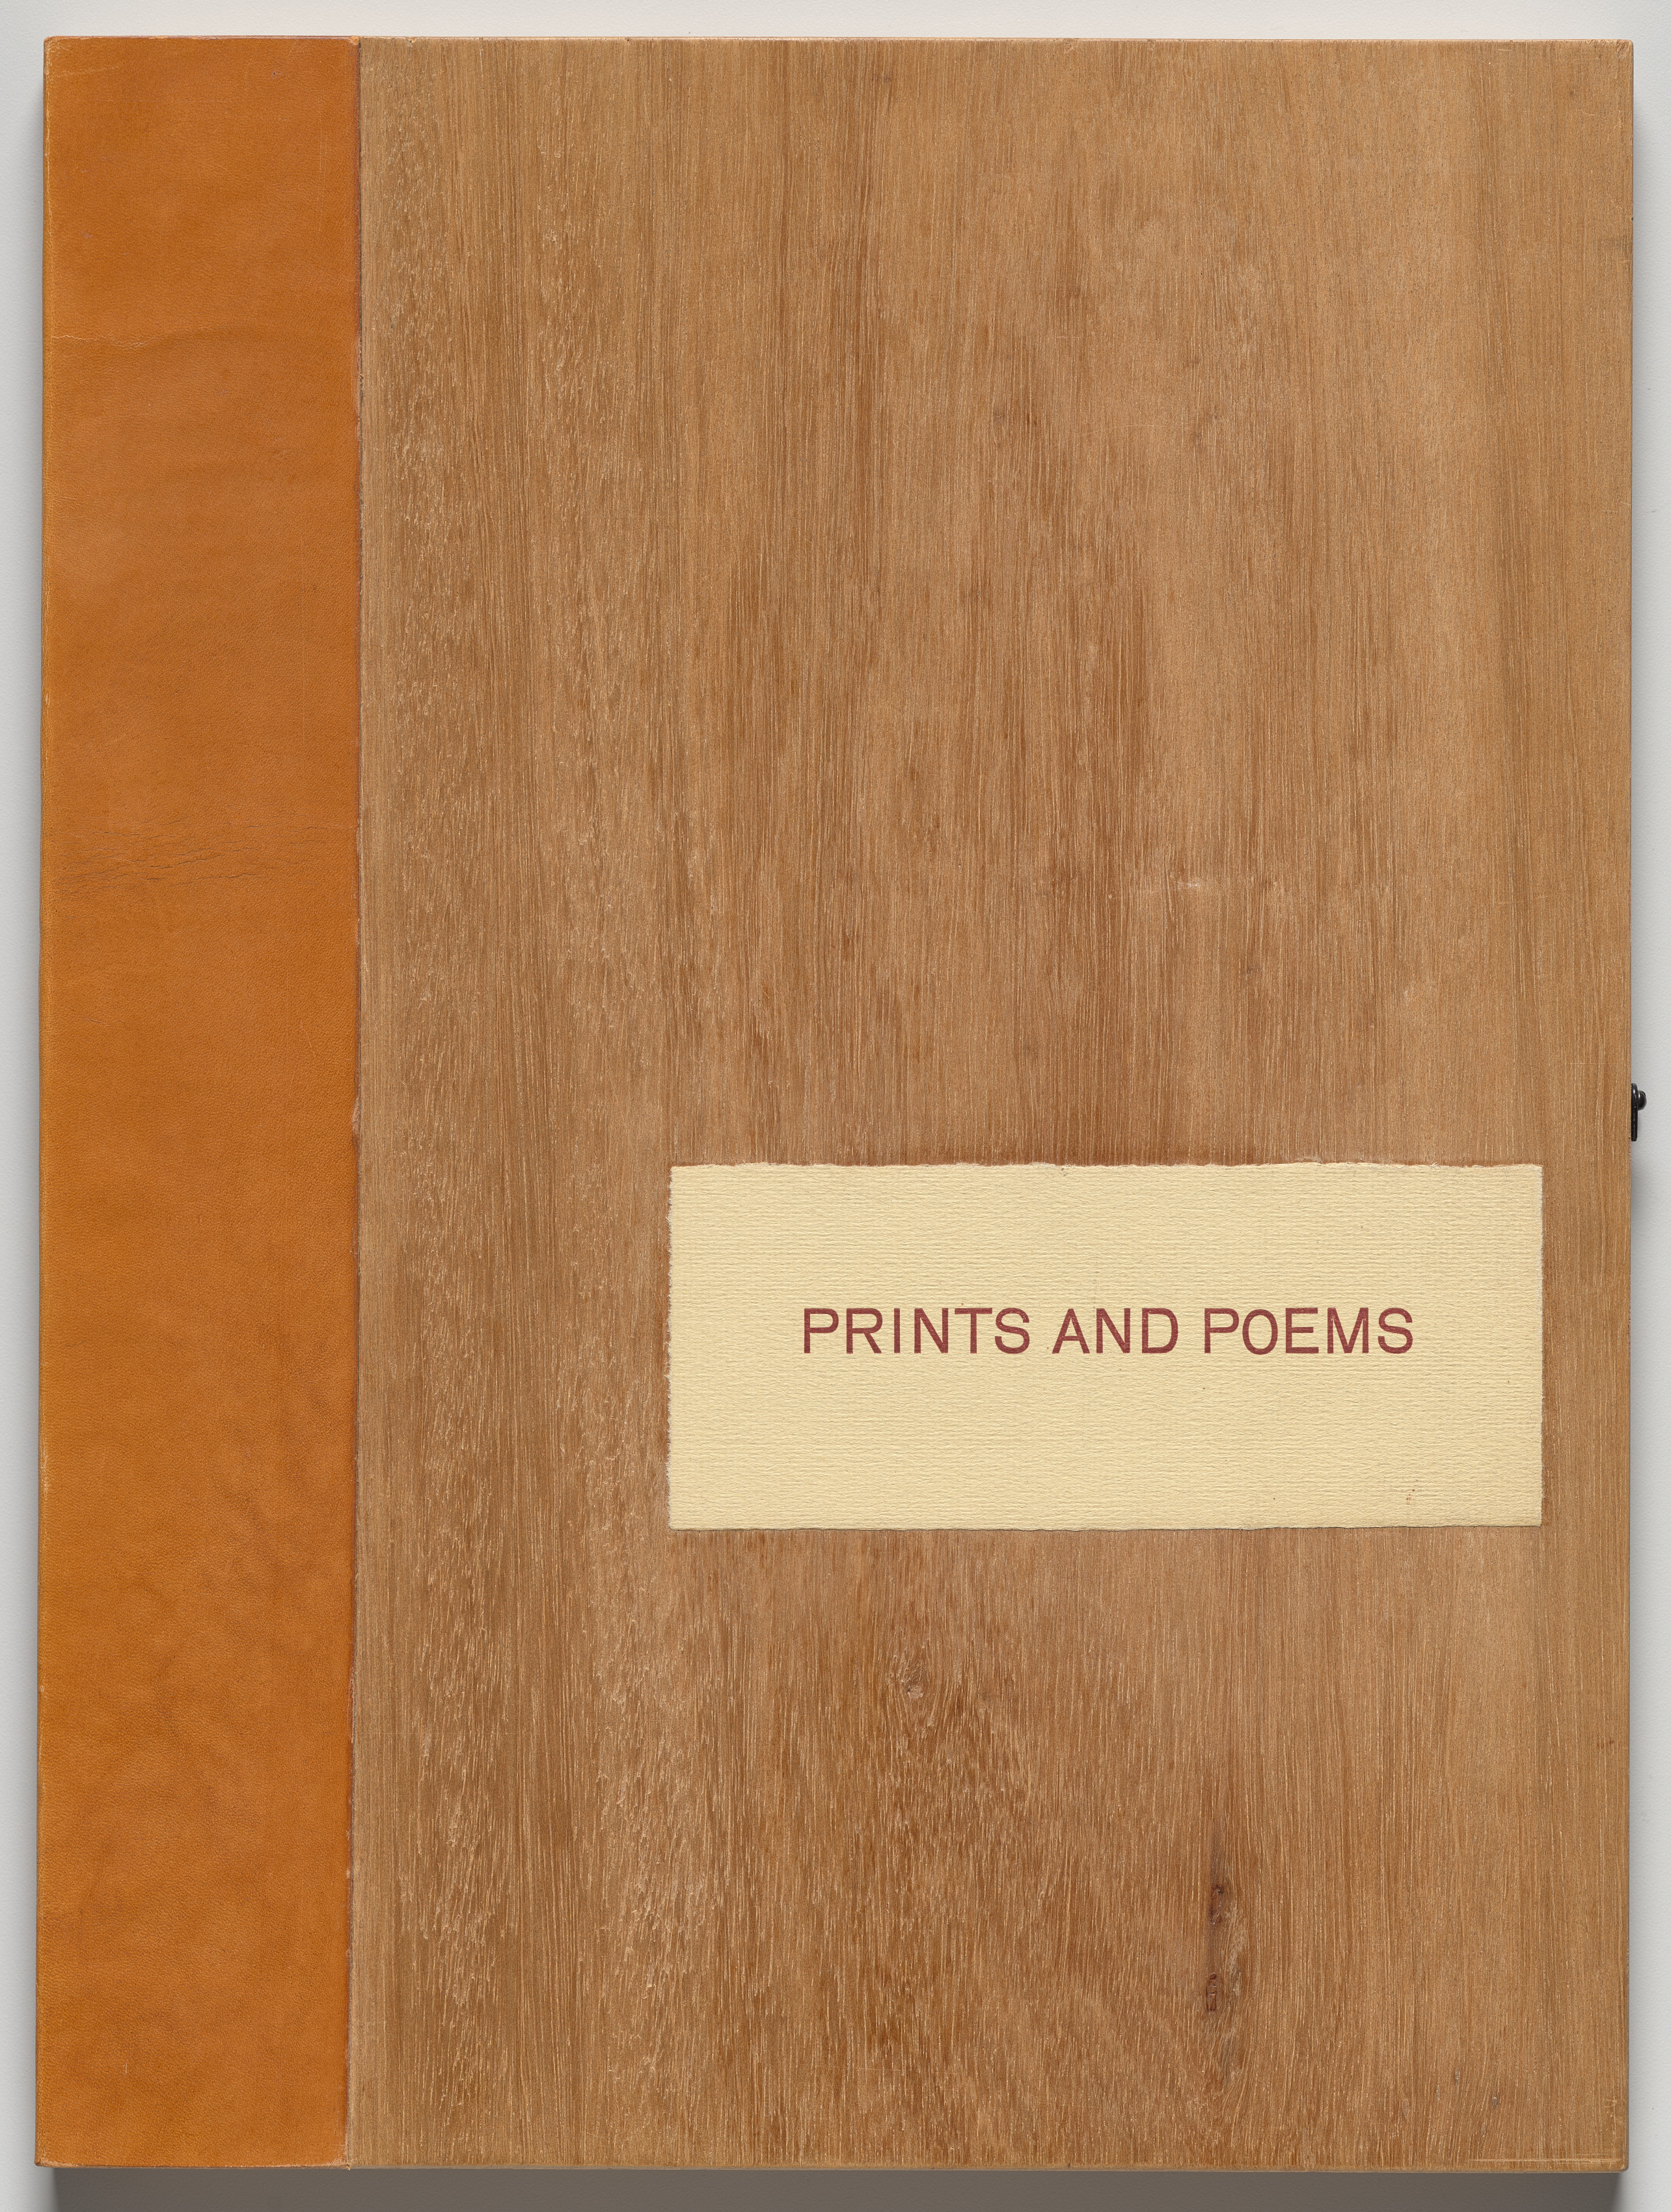 Prints and Poems